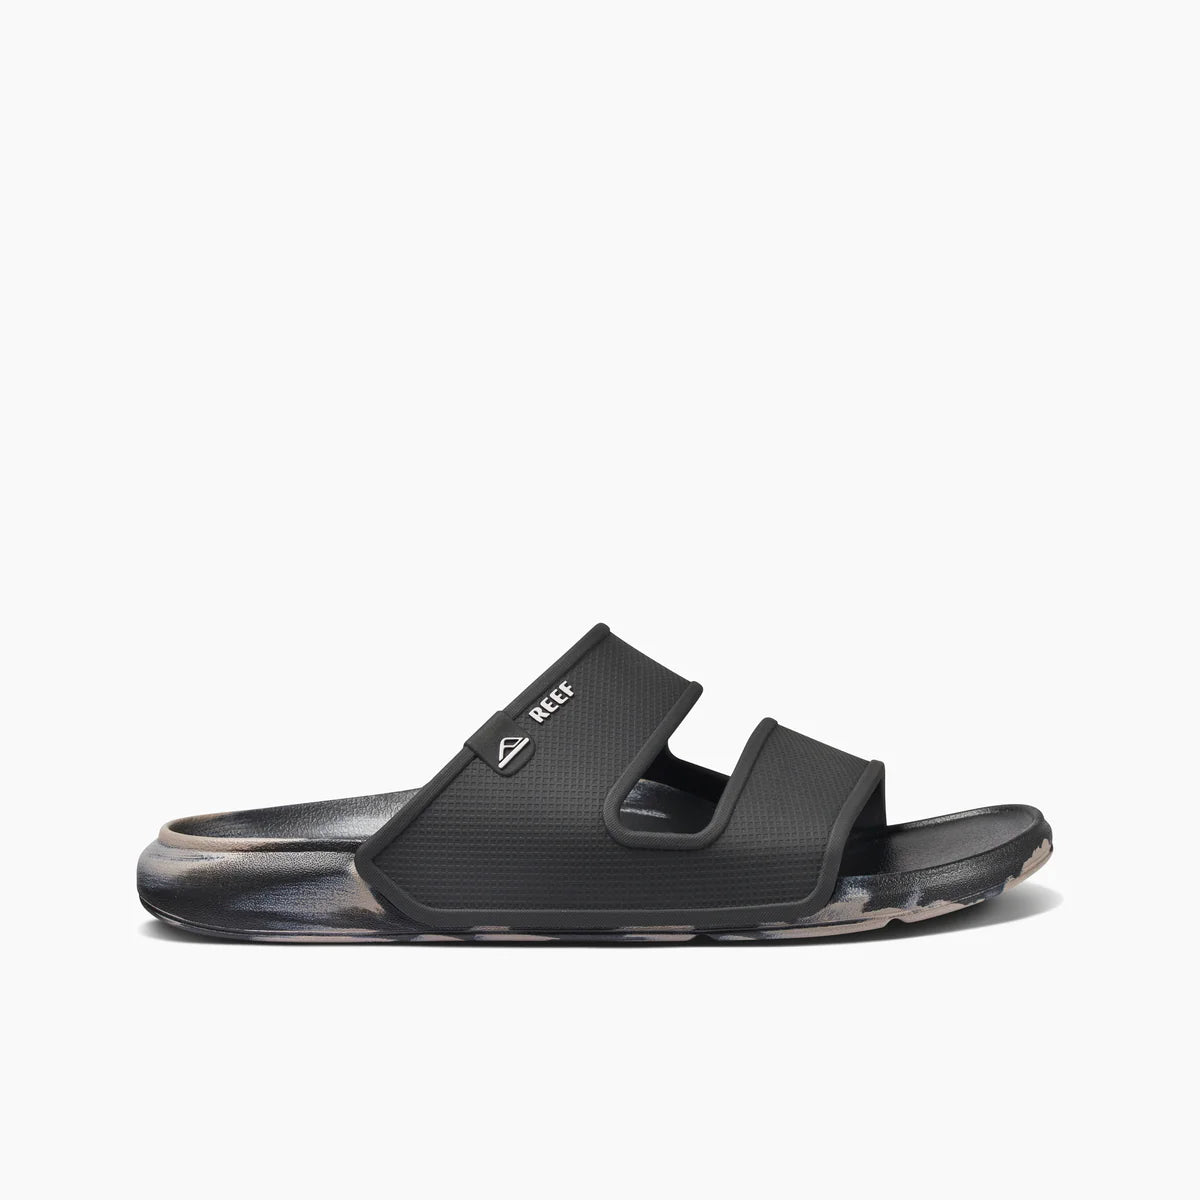 Reef Men's Oasis Double up Black/Taupe Marble